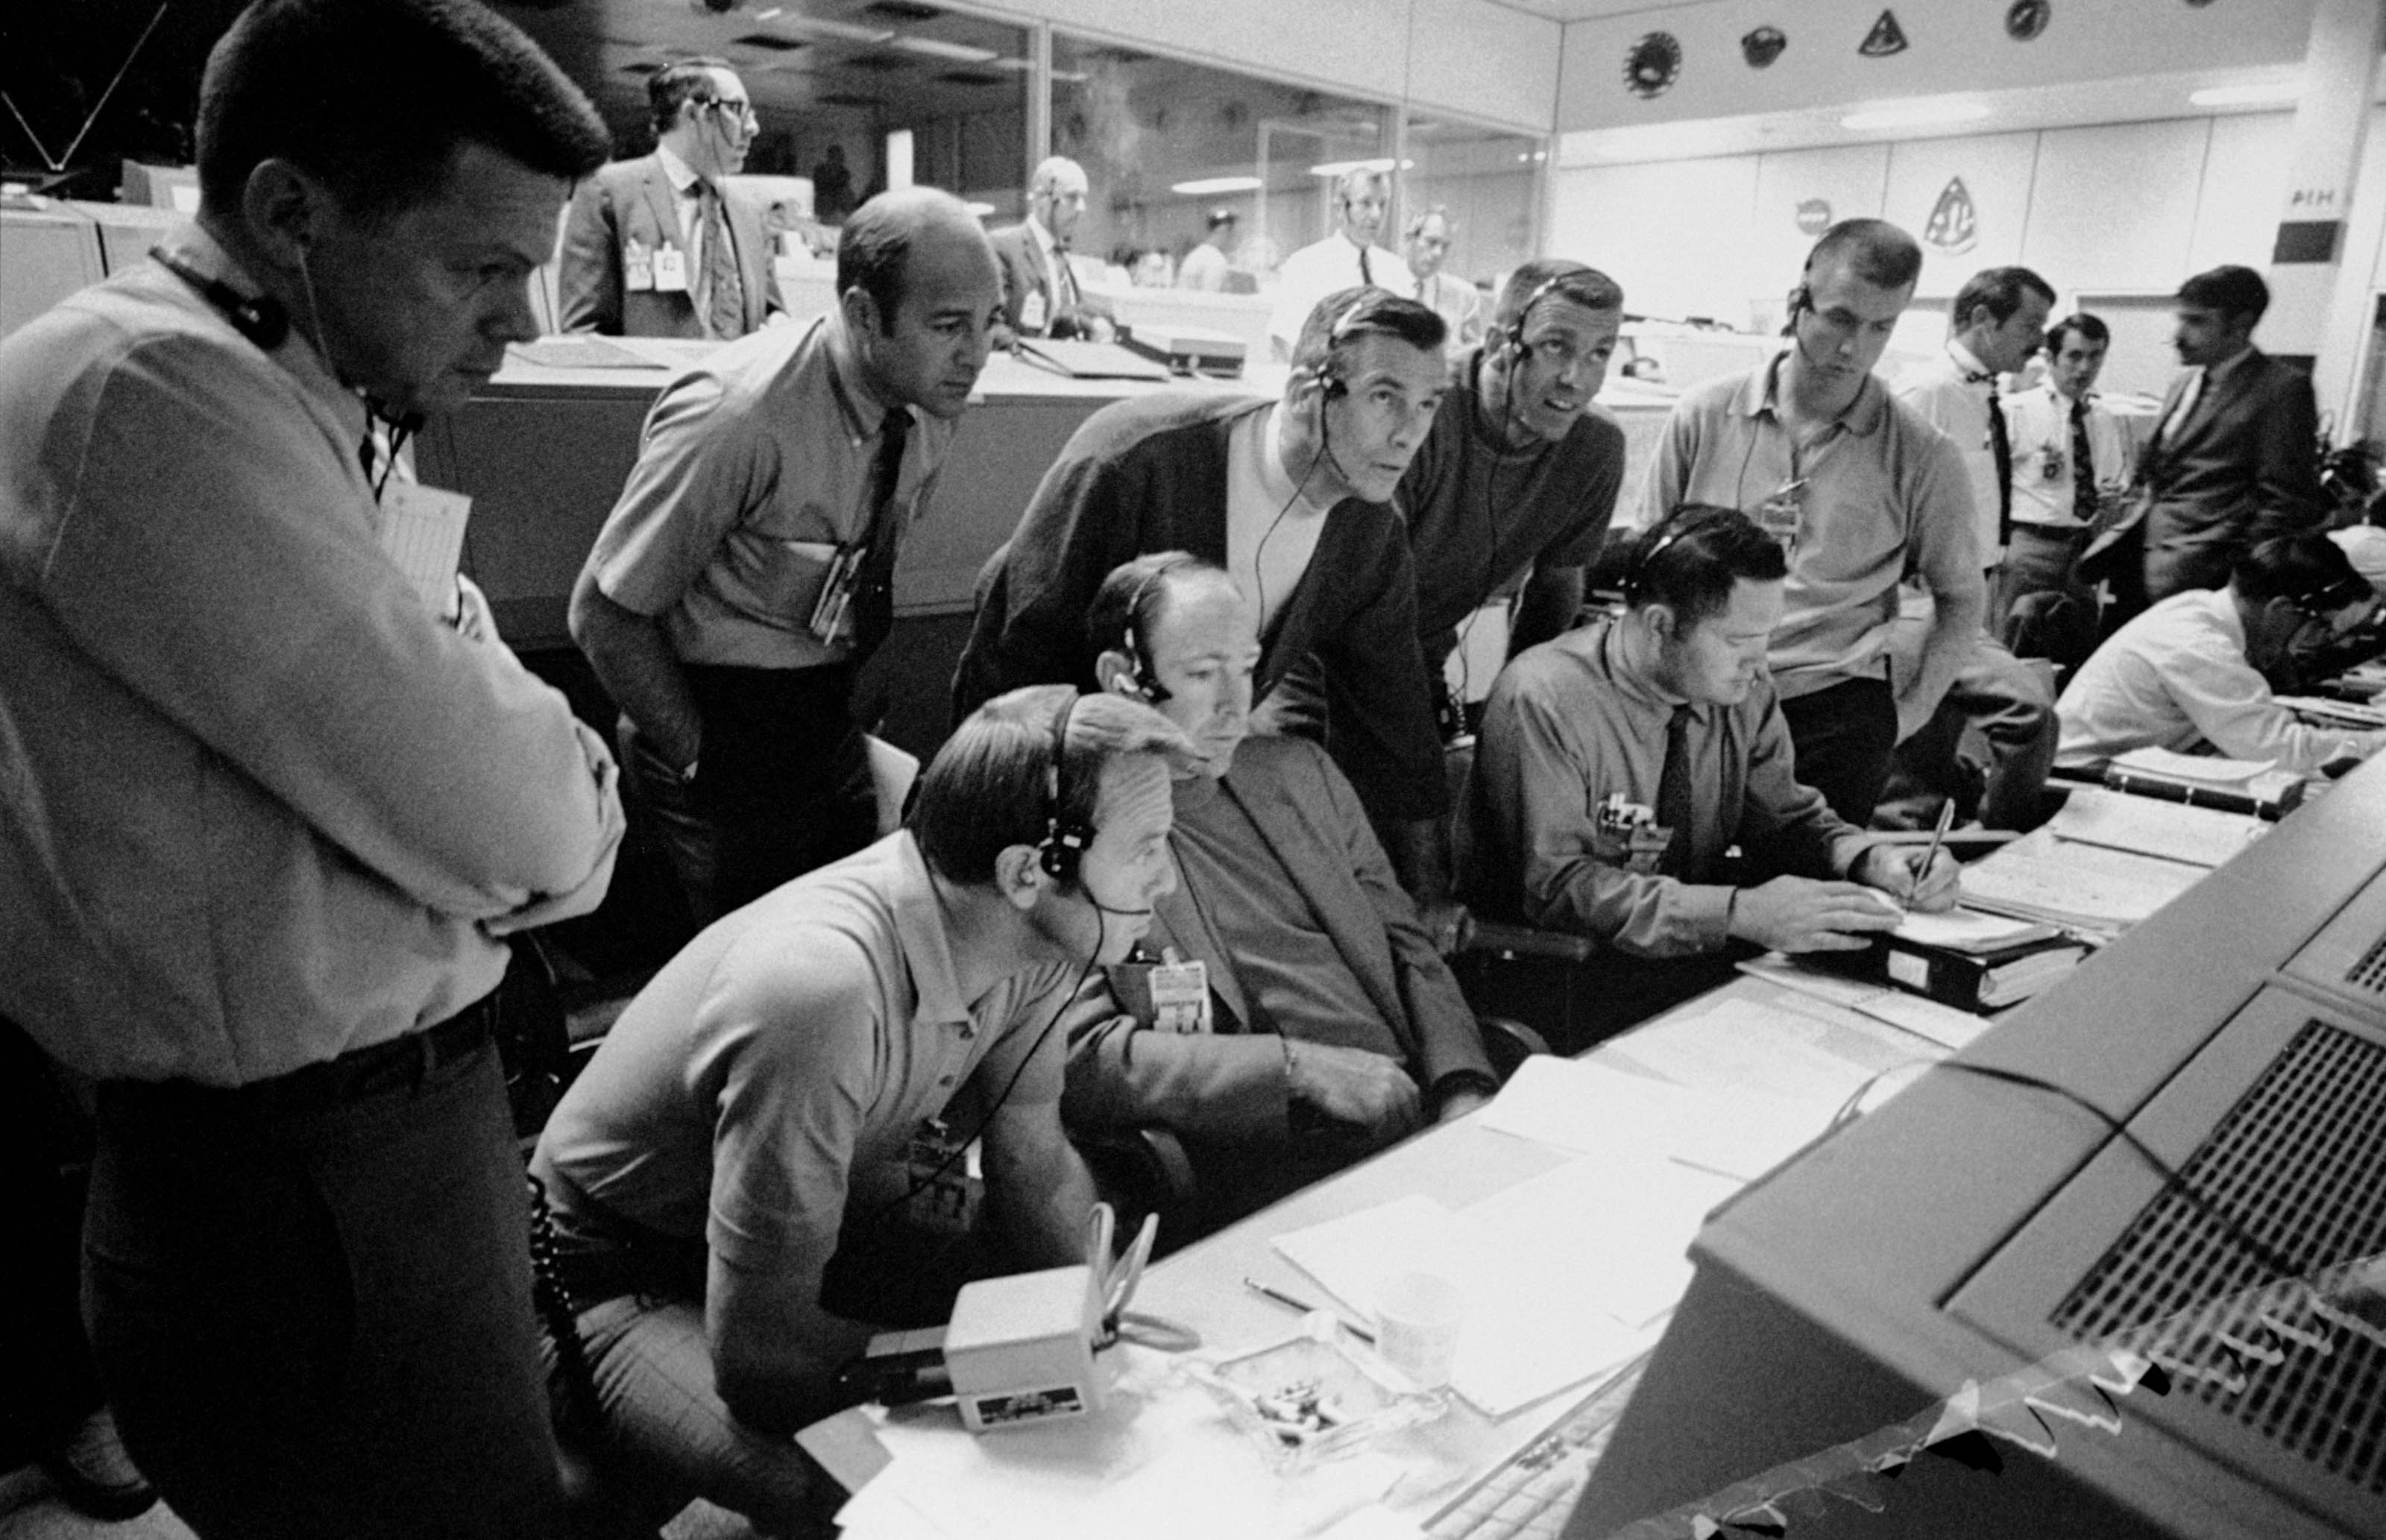 Men gather in the Mission Control Room in Houston during the third day of the Apollo 13 mission